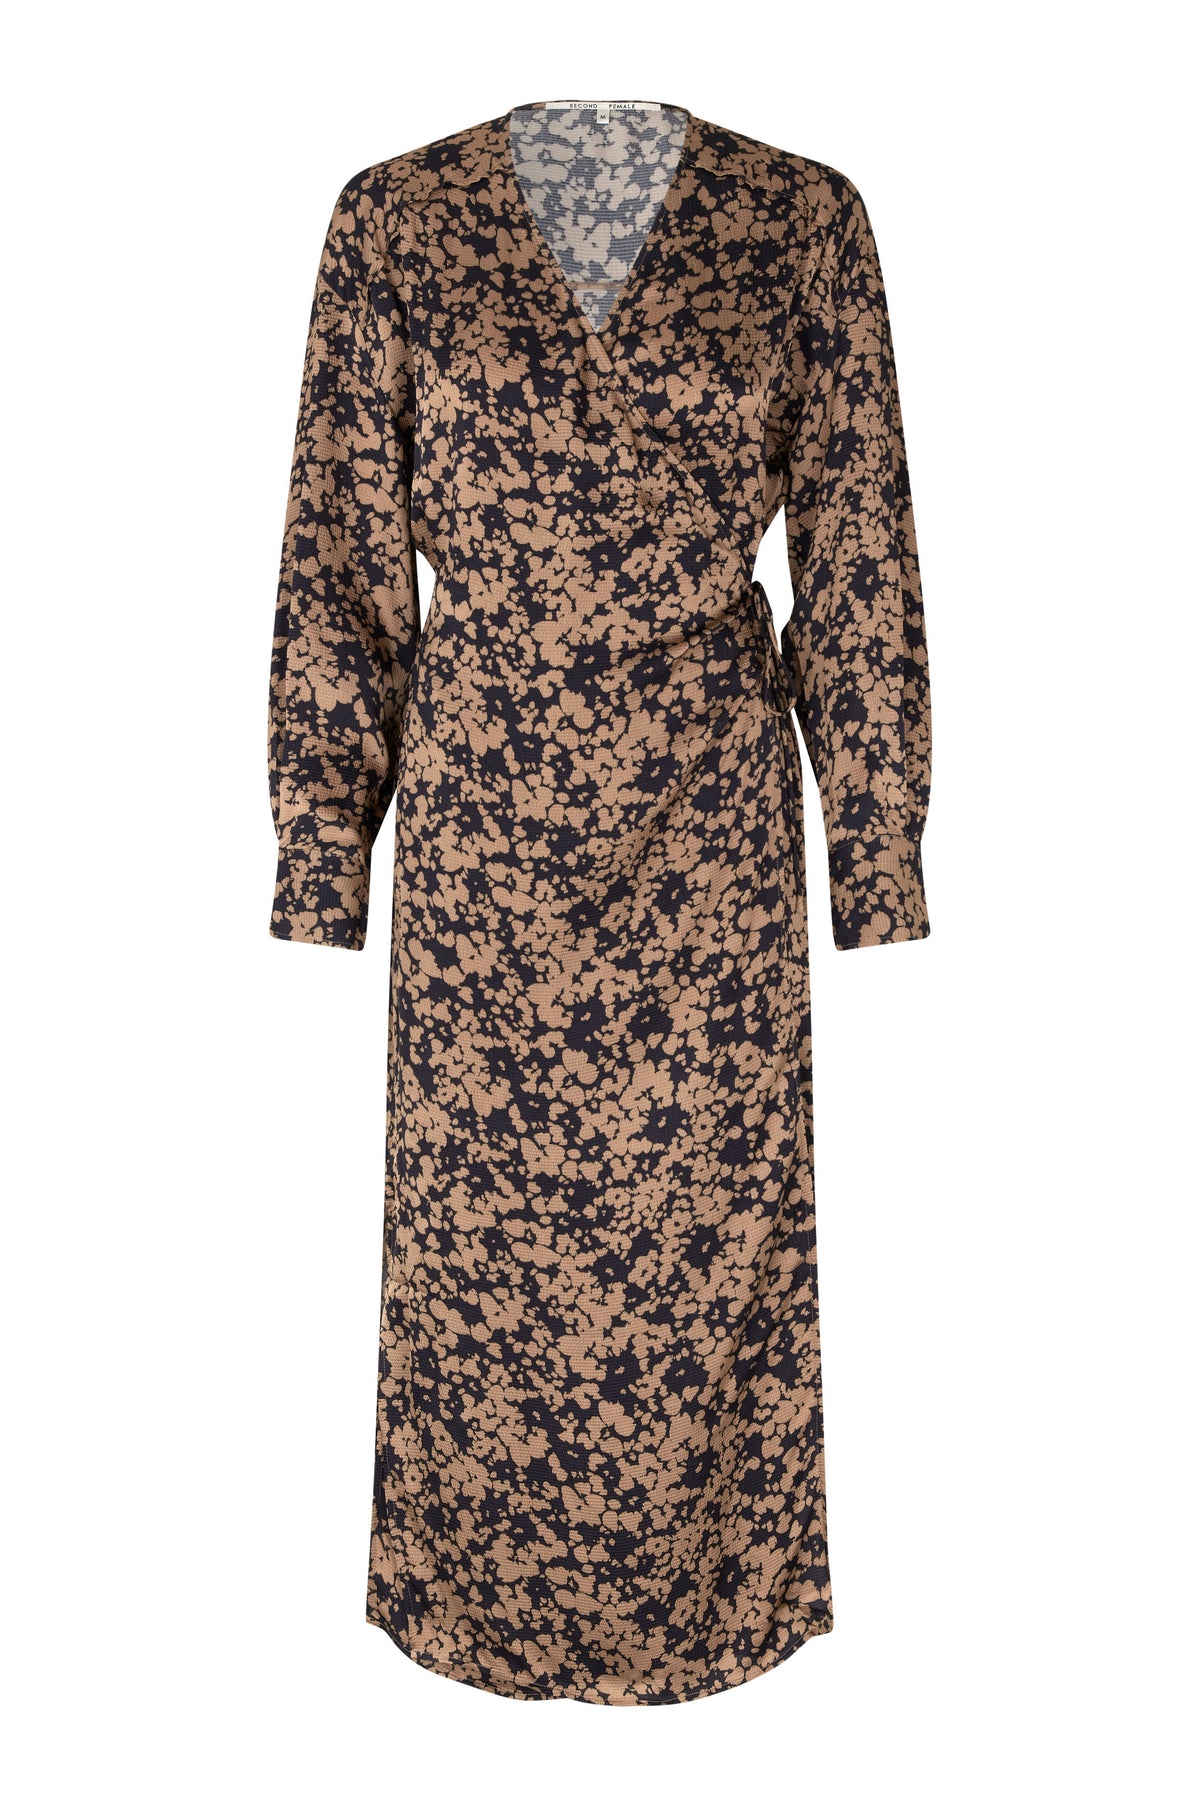 Bronze and navy floral print long sleeved self tie wrap dress